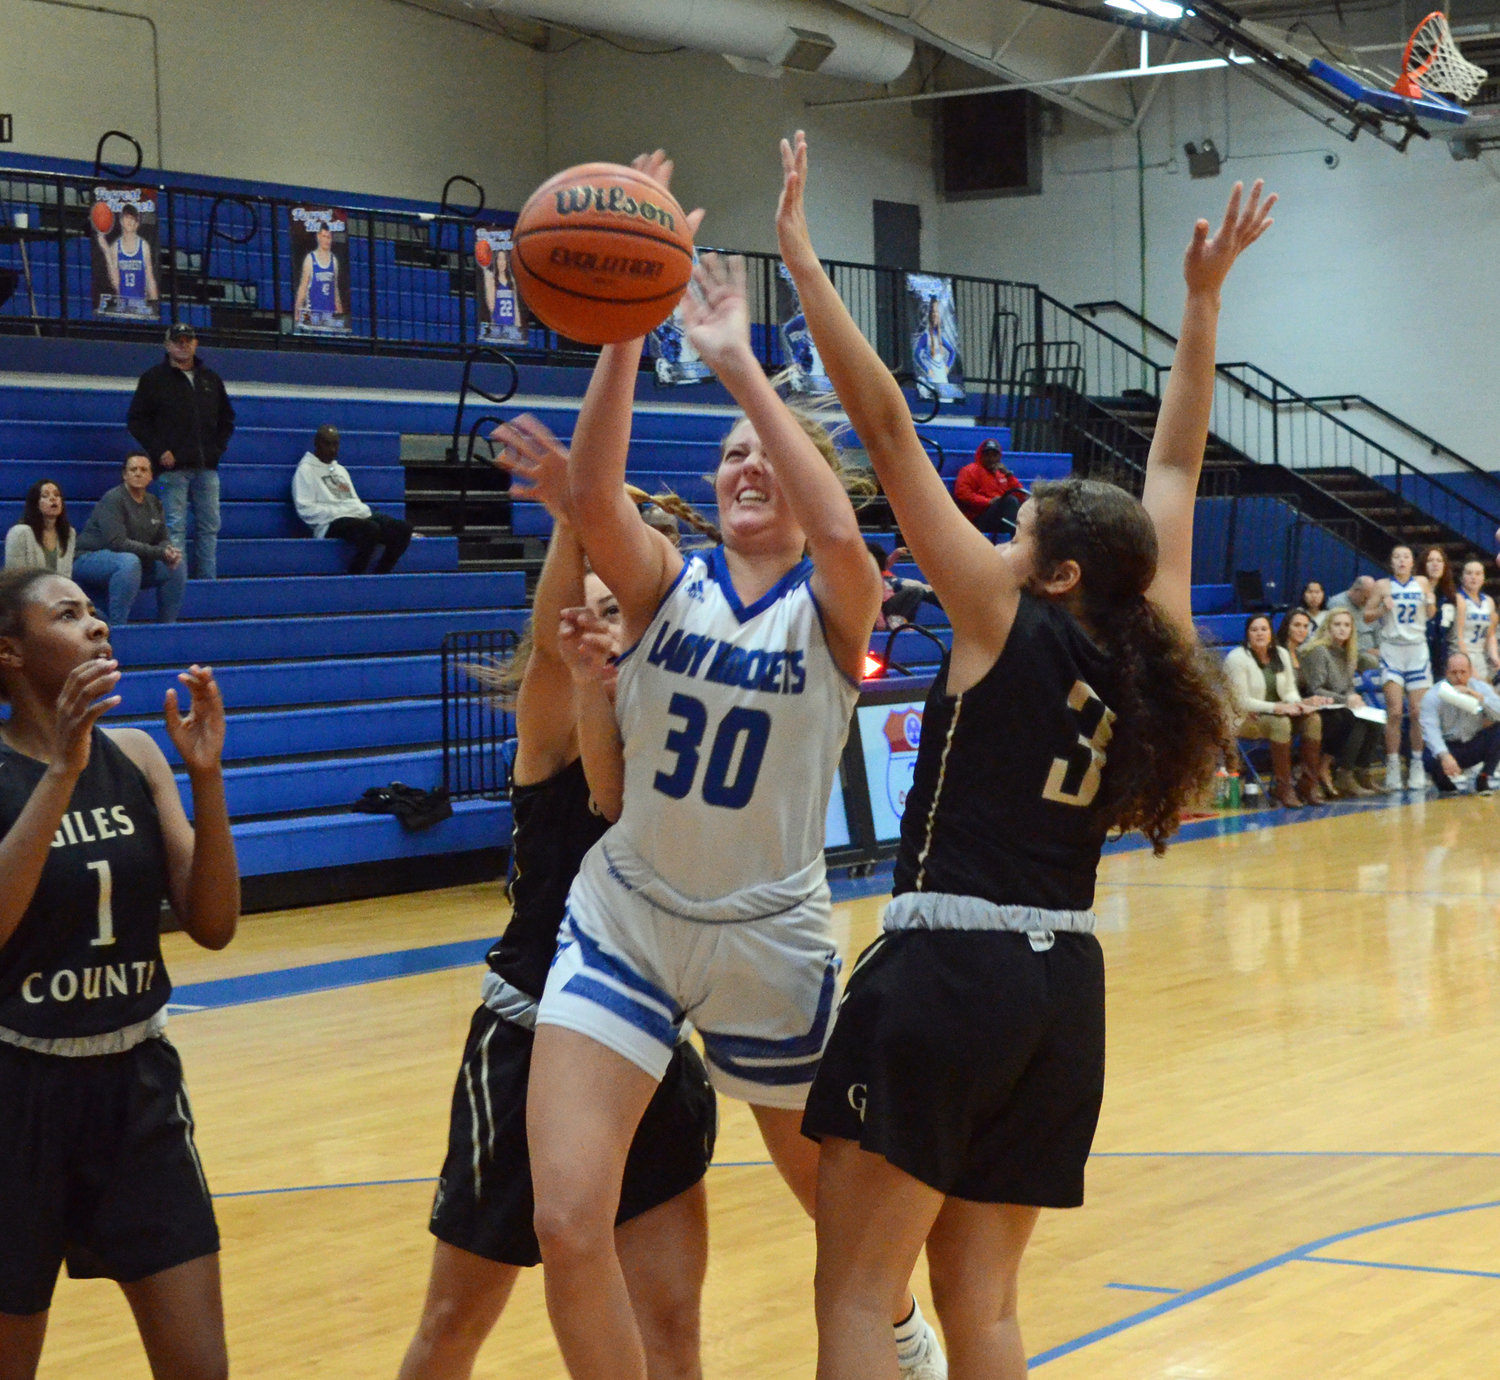 Senior Ryann Lewis (30), who scored a career-high 14 points, takes the ball strong to the hoop versus the Lady Bobcats Friday night at Chapel Hill.